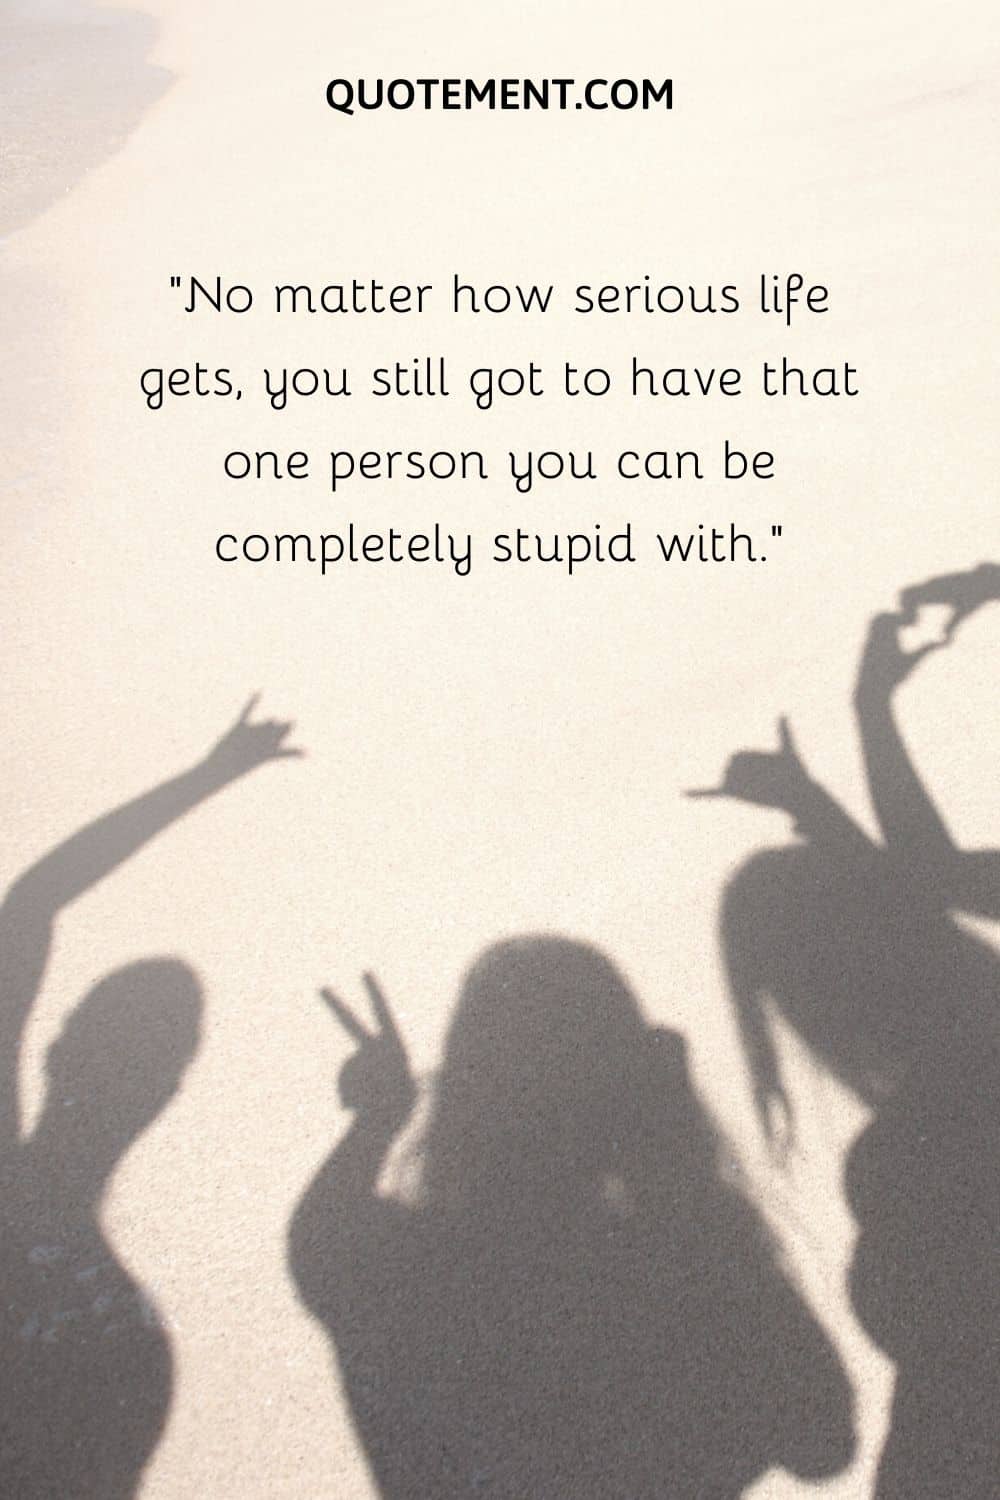 No matter how serious life gets, you still got to have that one person you can be completely stupid with